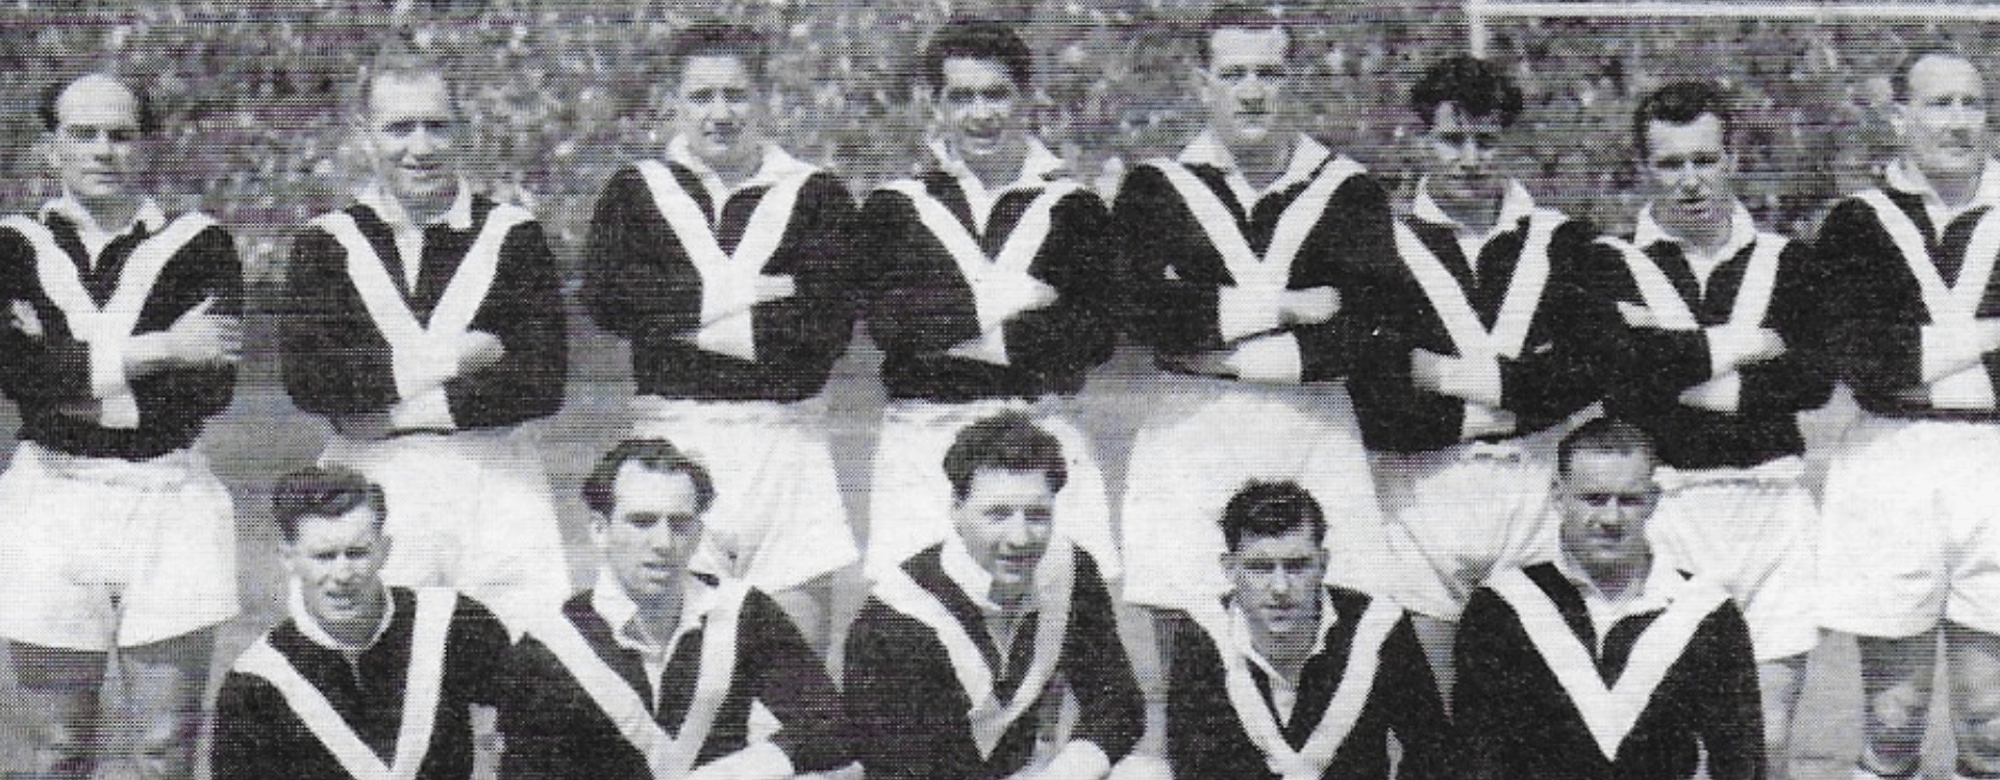 Remembering Hull FC’s 1956 Championship Final Winning Campaign